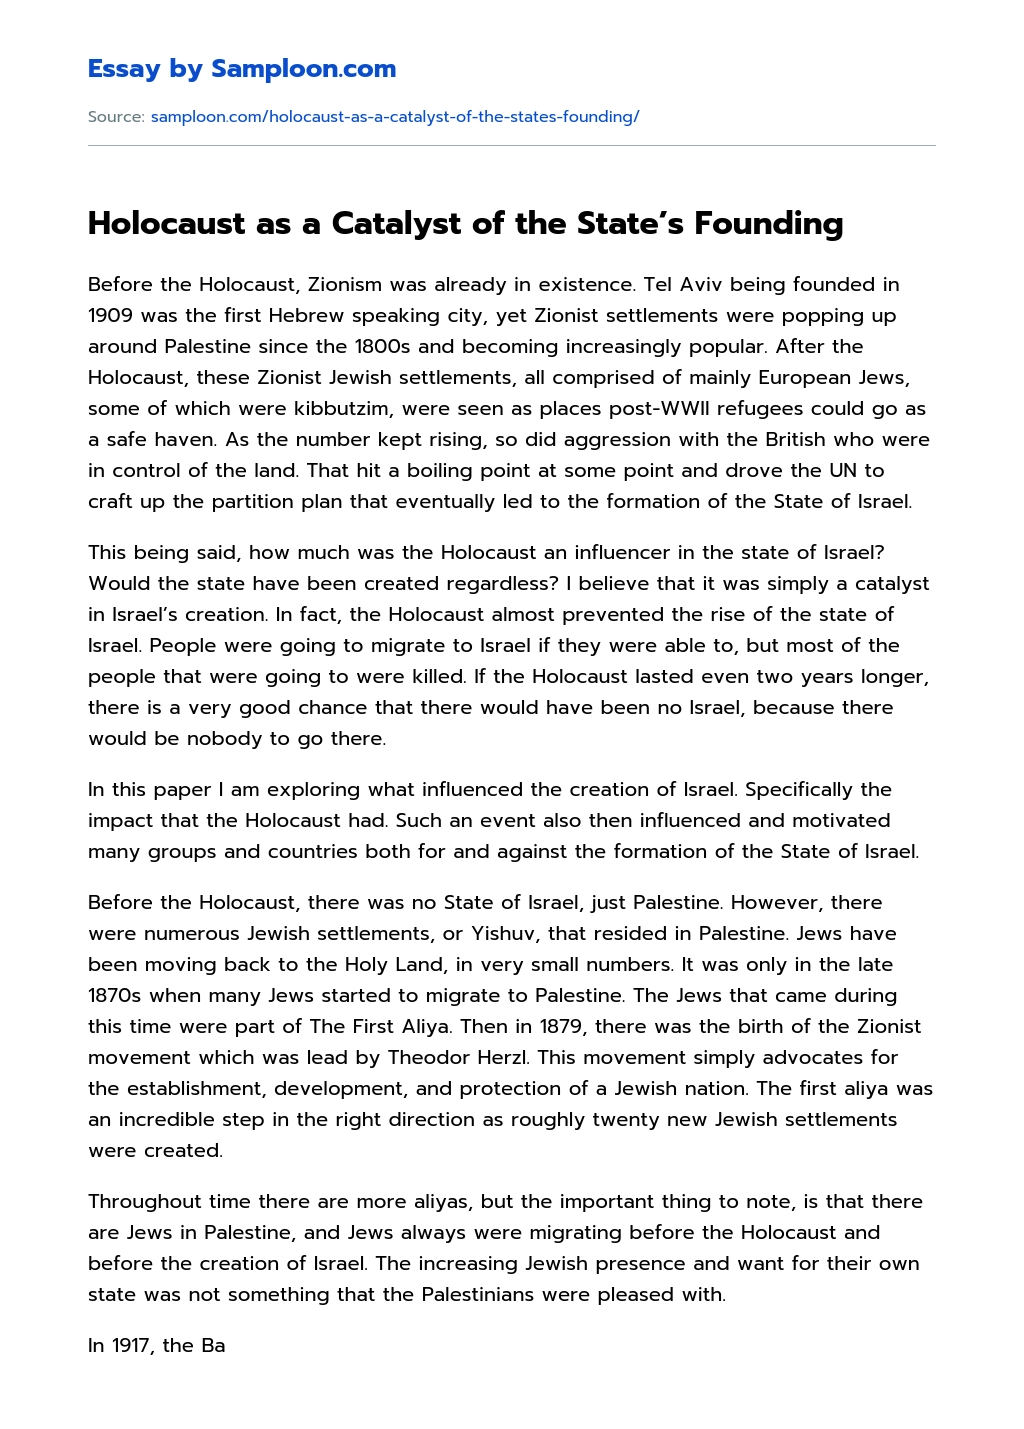 Holocaust as a Catalyst of the State’s Founding essay